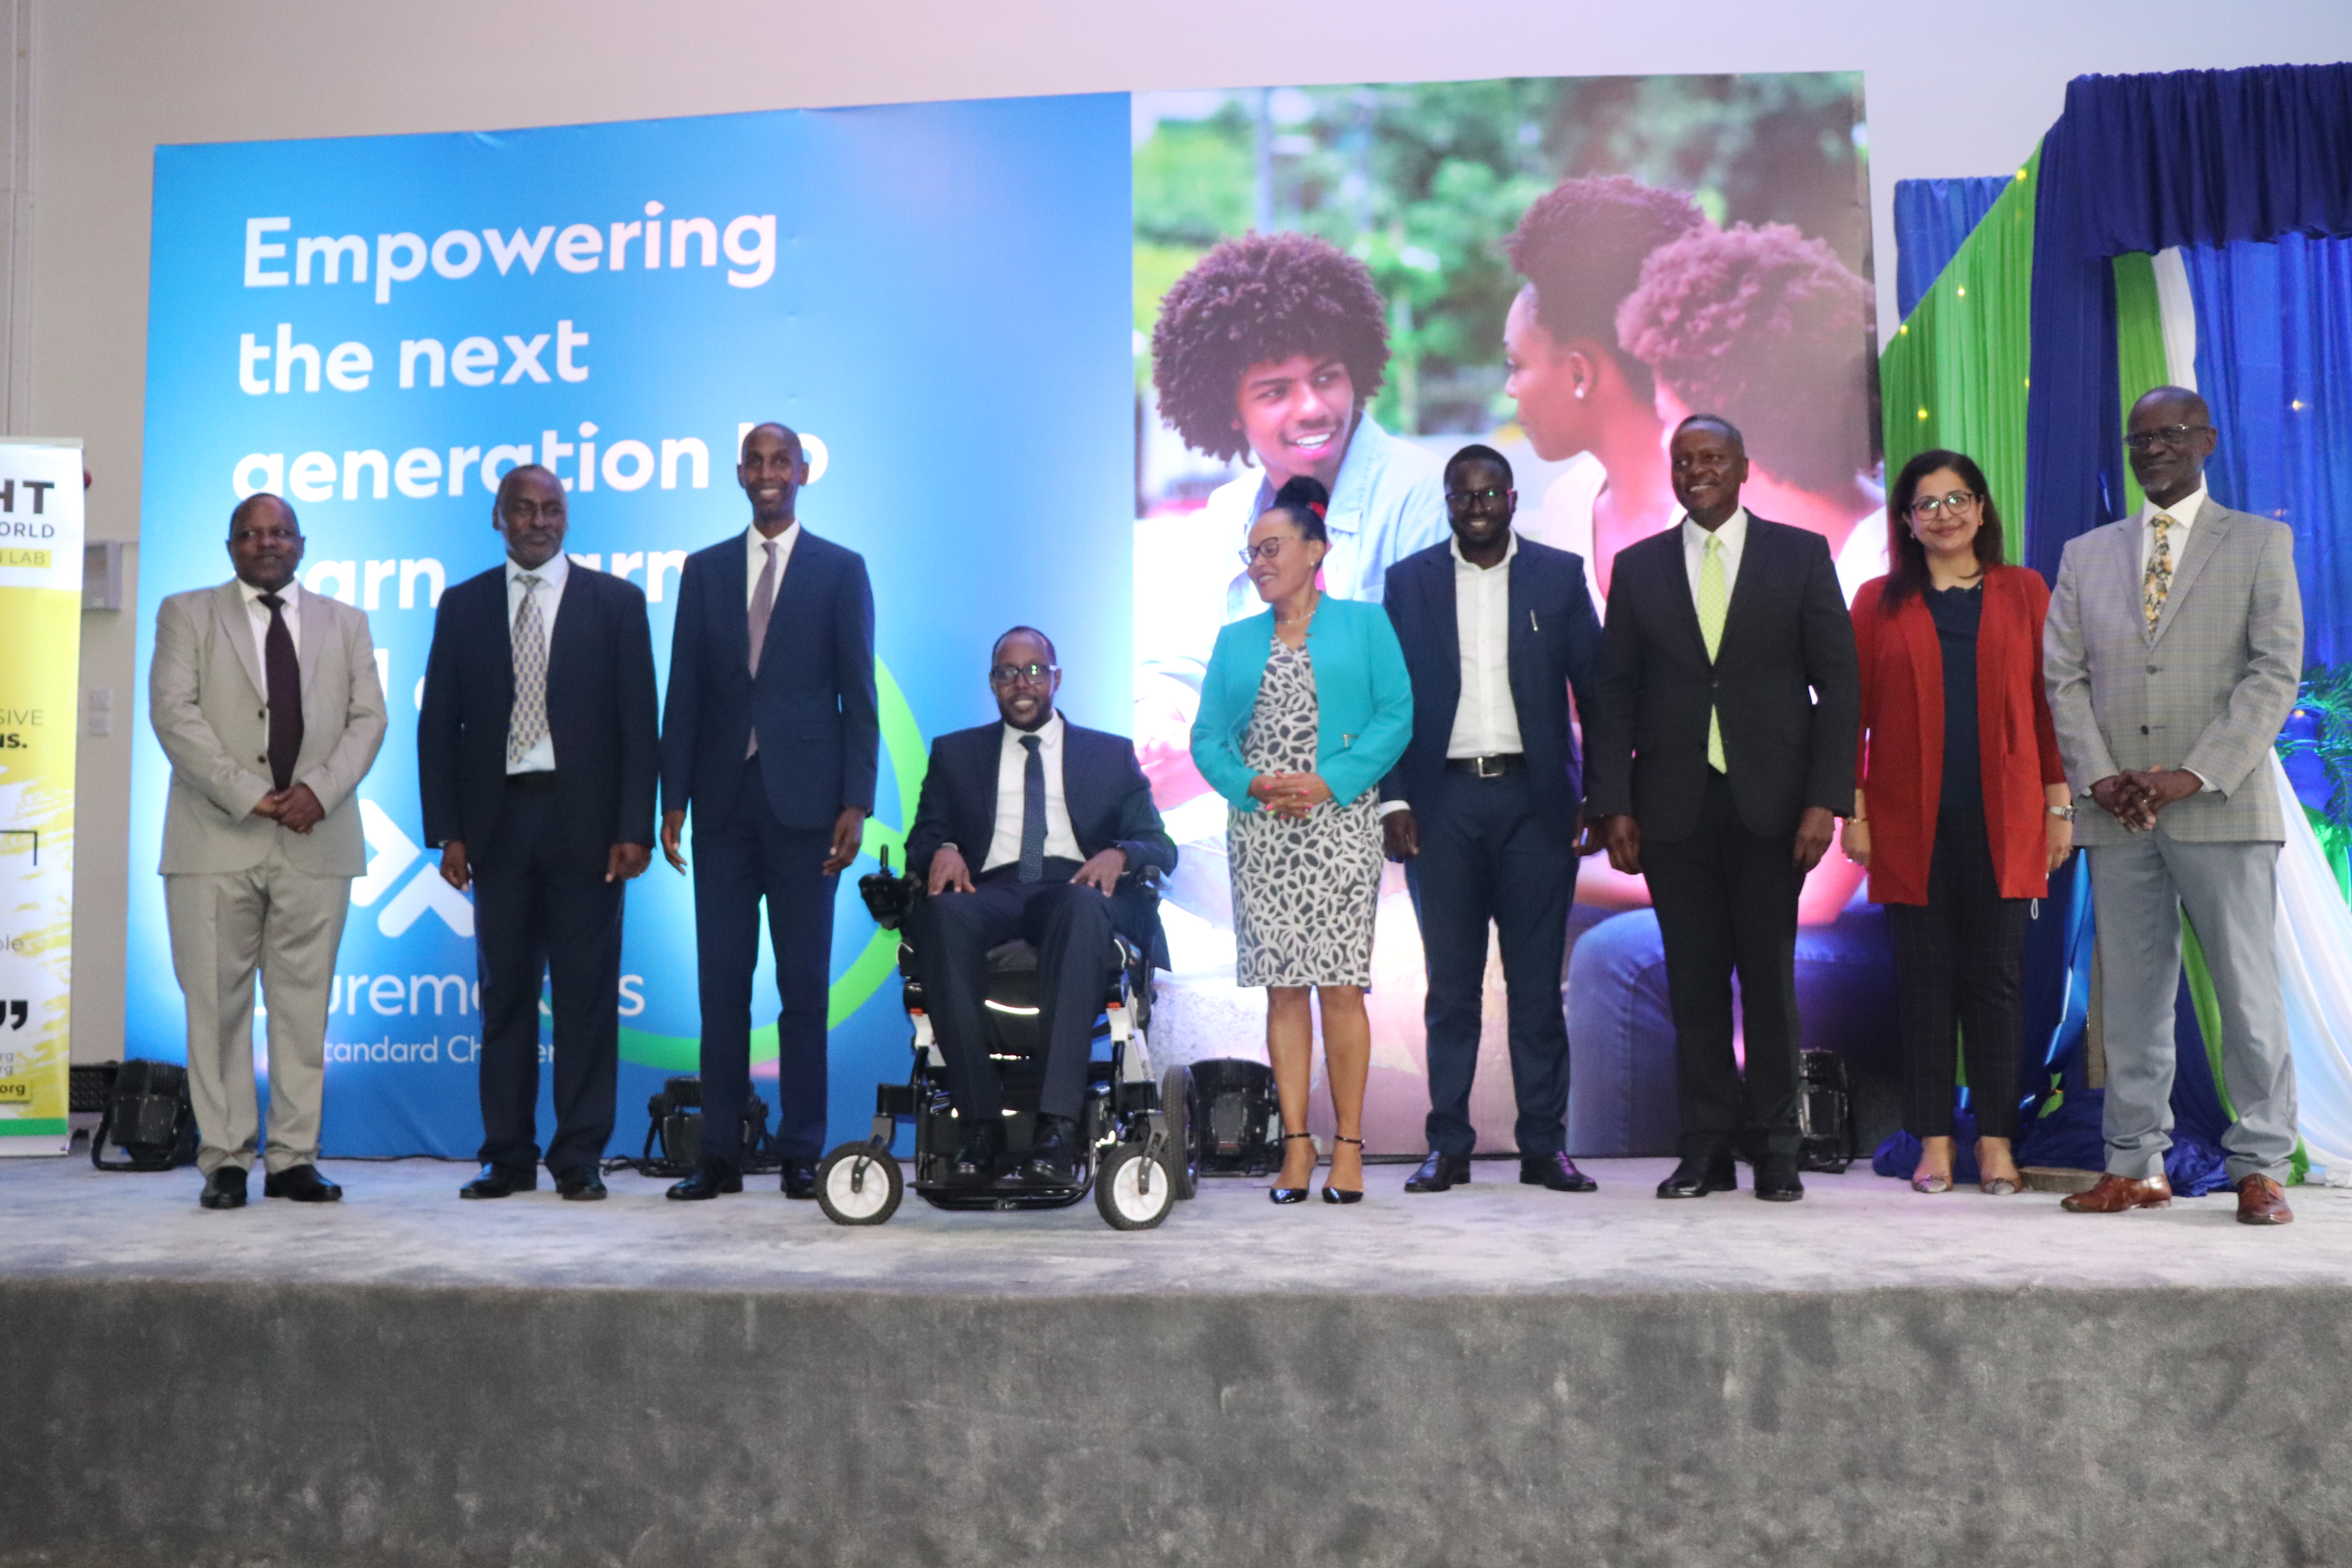 Standard Chartered Bank invests Kshs. 96.9 million with Sightsavers and Light for the World to up-scale employability skills program for the youth